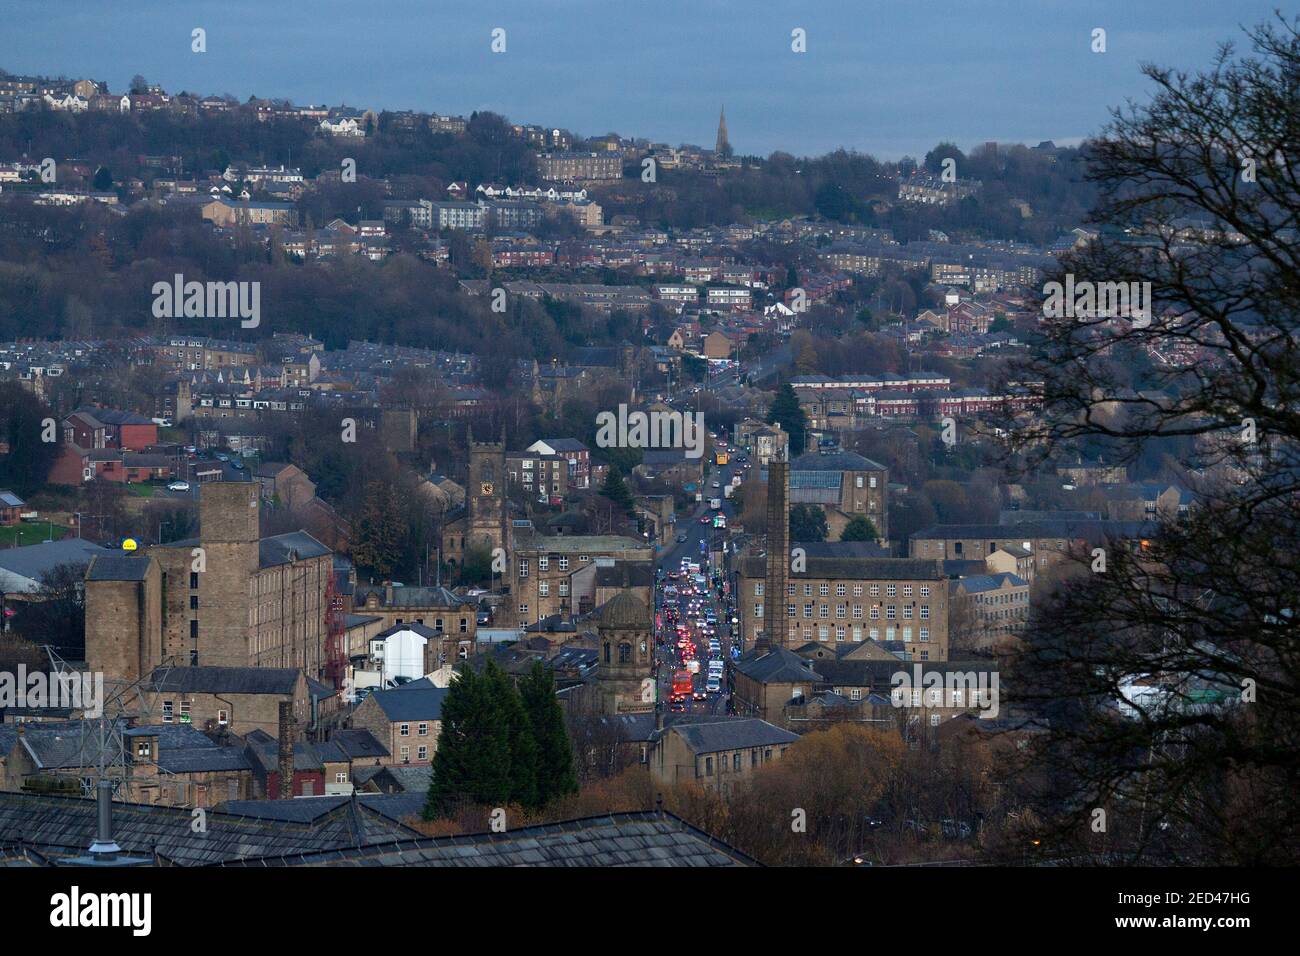 View of the town at dusk, Sowerby Bridge, West Yorkshire Stock Photo